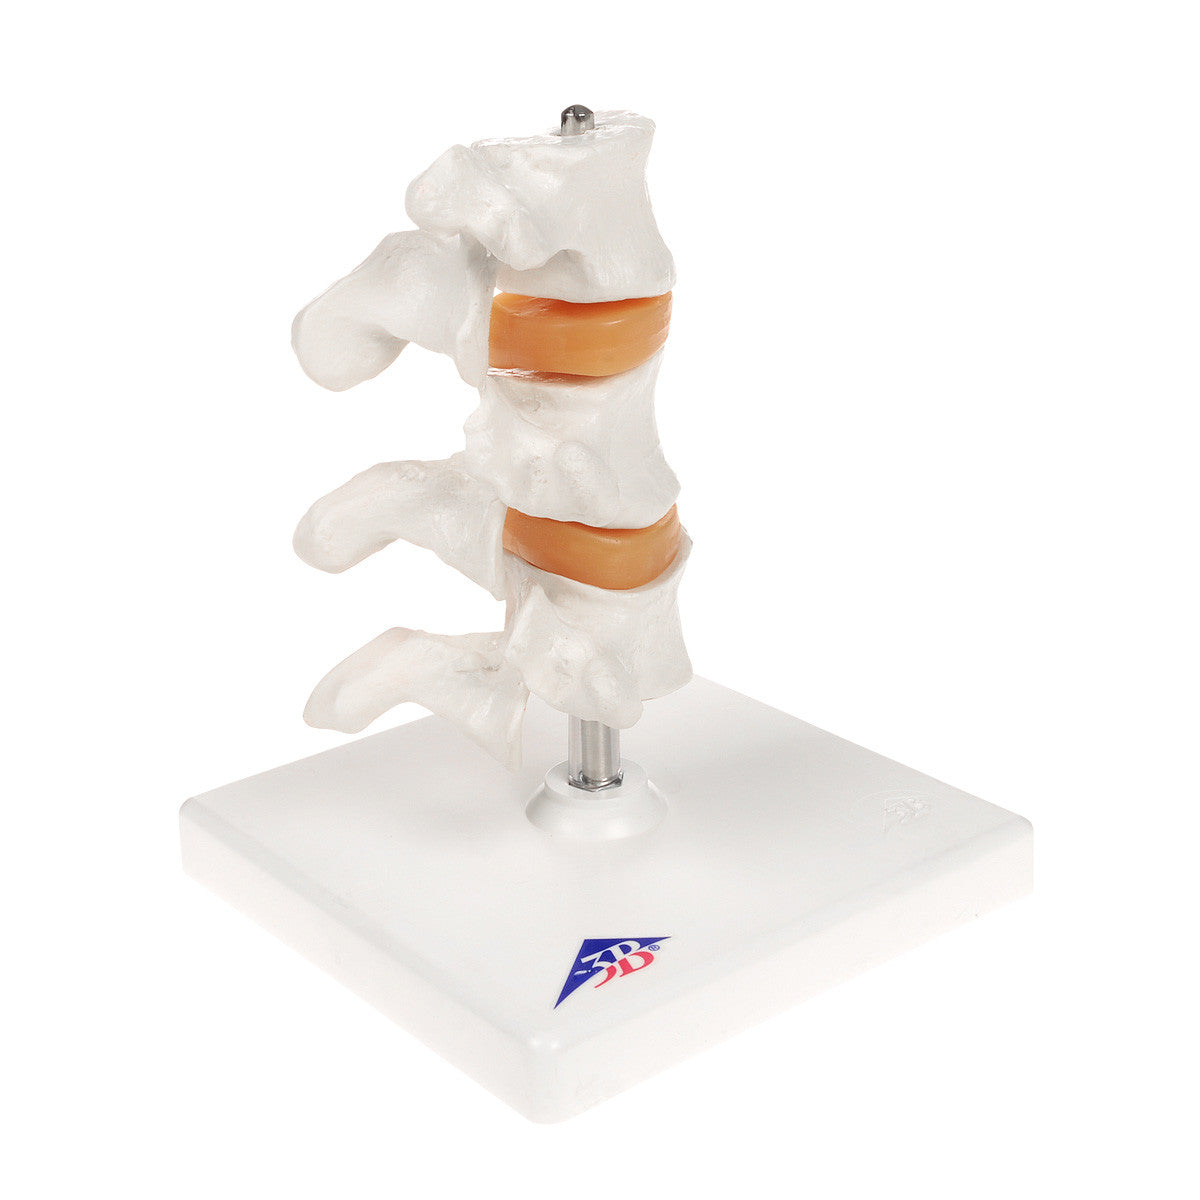 Deluxe Osteoporosis Model - external view